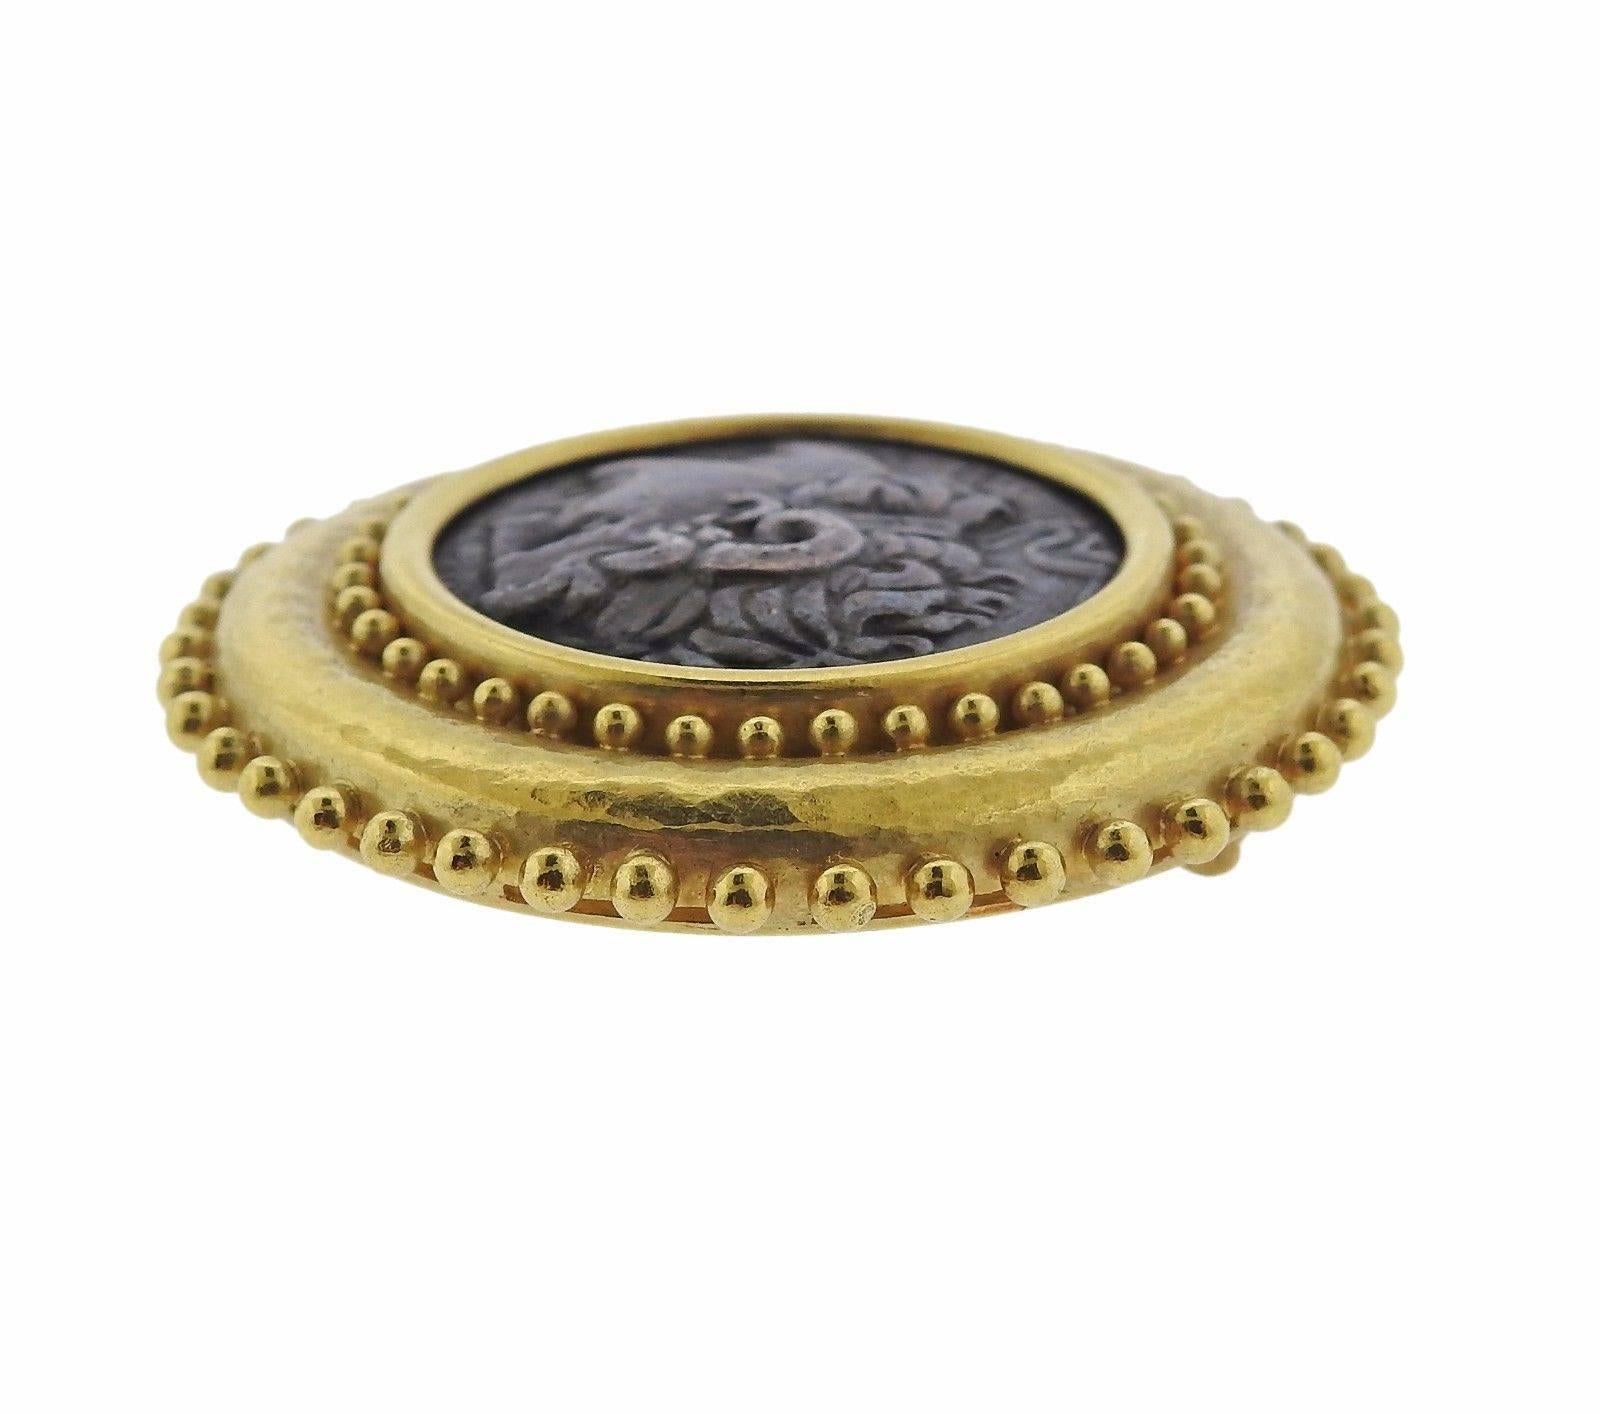 An 18k yellow gold brooch set with a bronze coin.  The brooch measures 47mm in diameter and weighs 44.1 grams.  Marked: Maker's Mark, 18k.